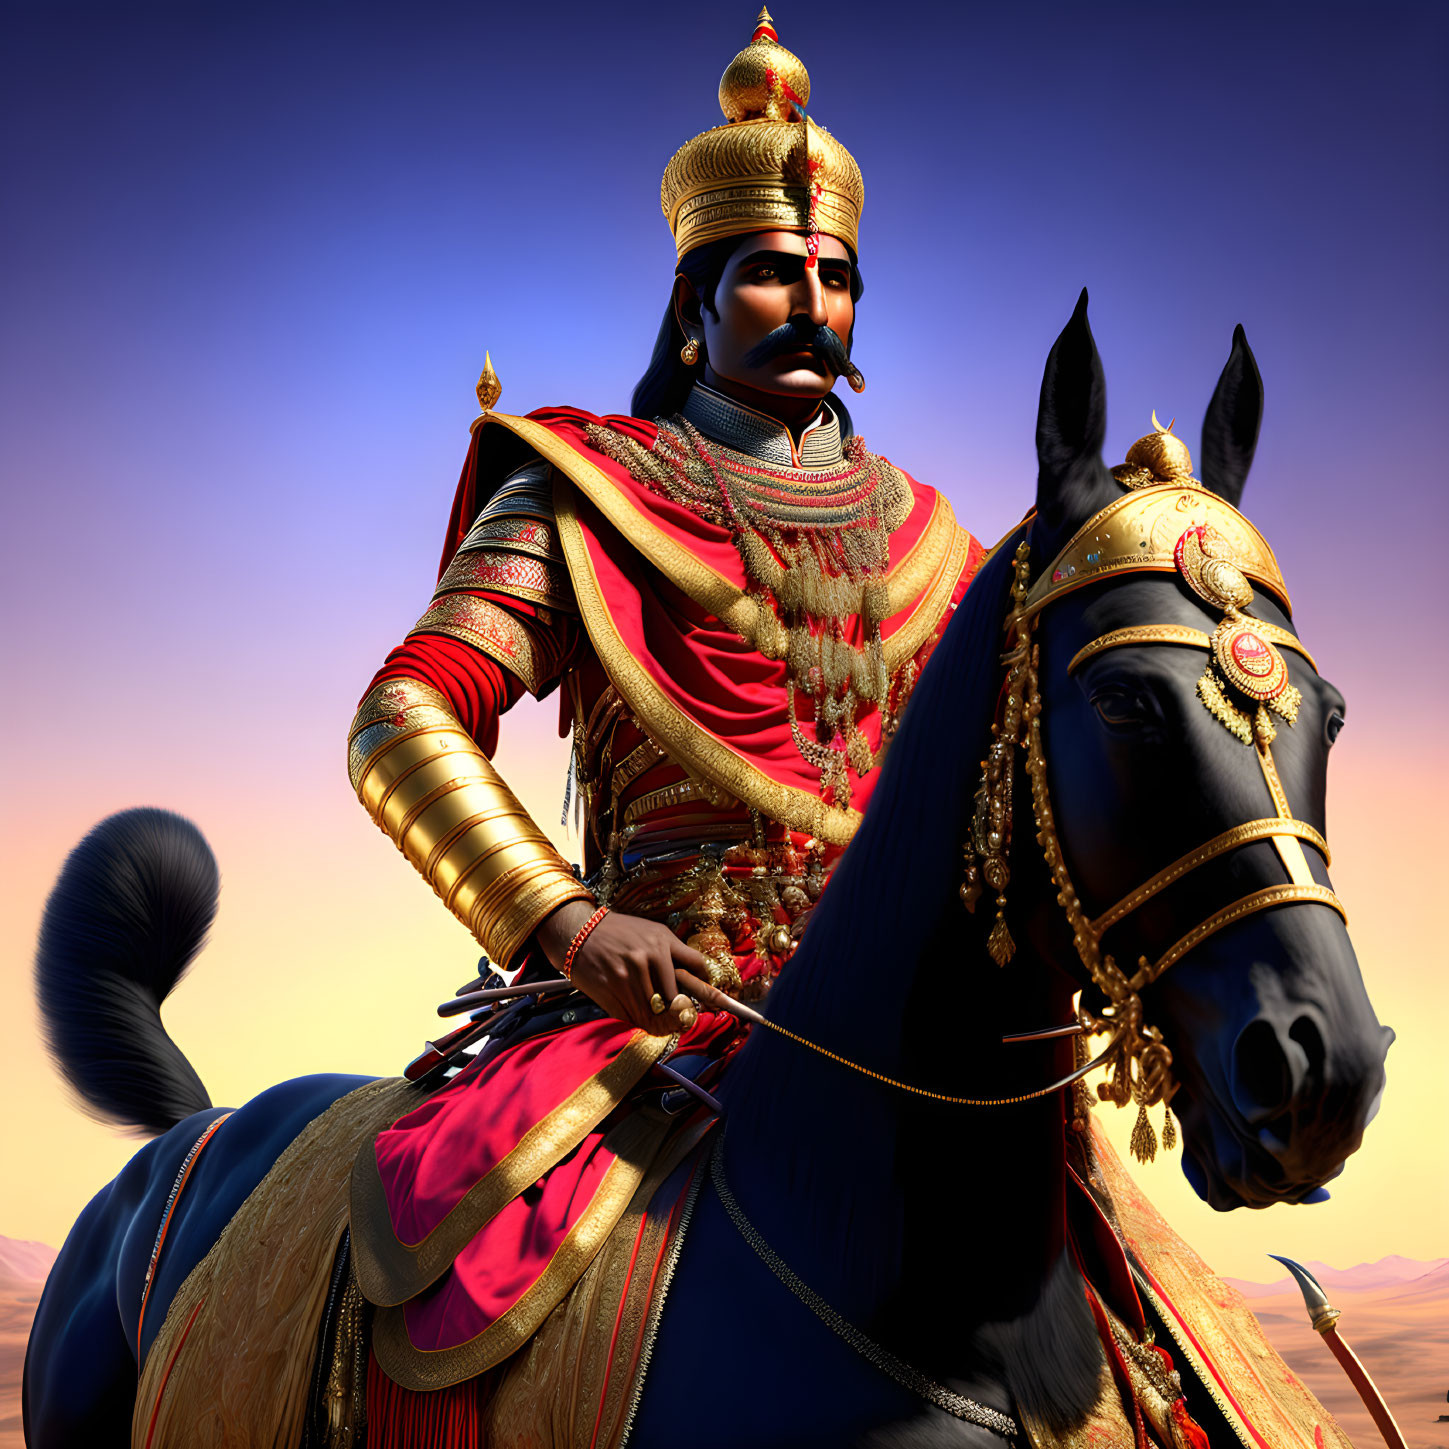 Regal warrior in traditional armor on majestic black horse in dusky sky.